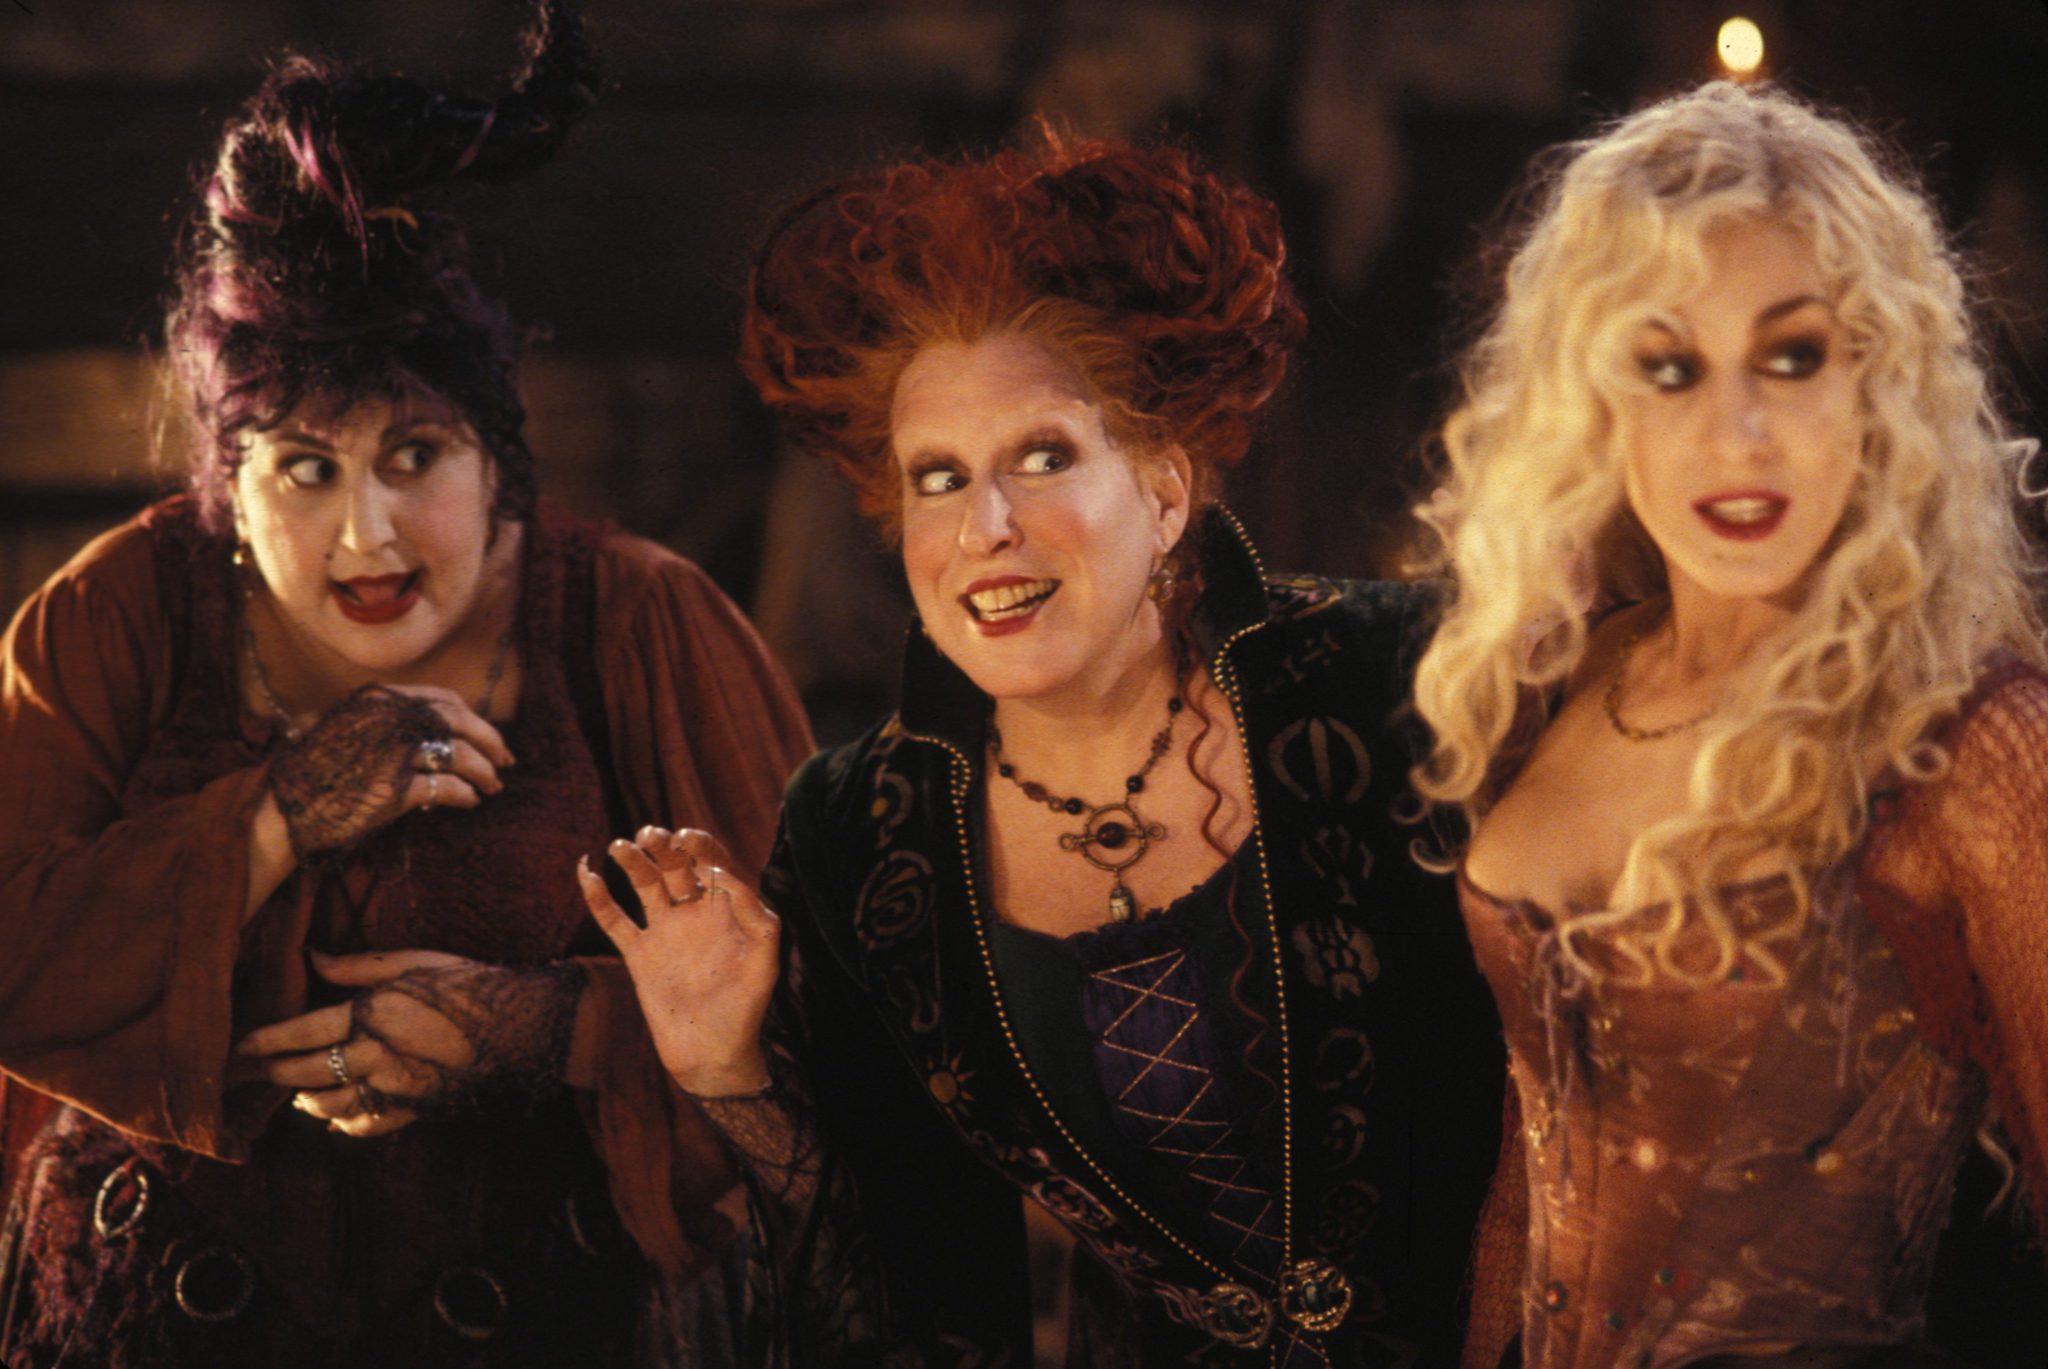 The 25th Anniversary Edition of Hocus Pocus available on Digital, Movies Anywhere and Blu-ray 9/2